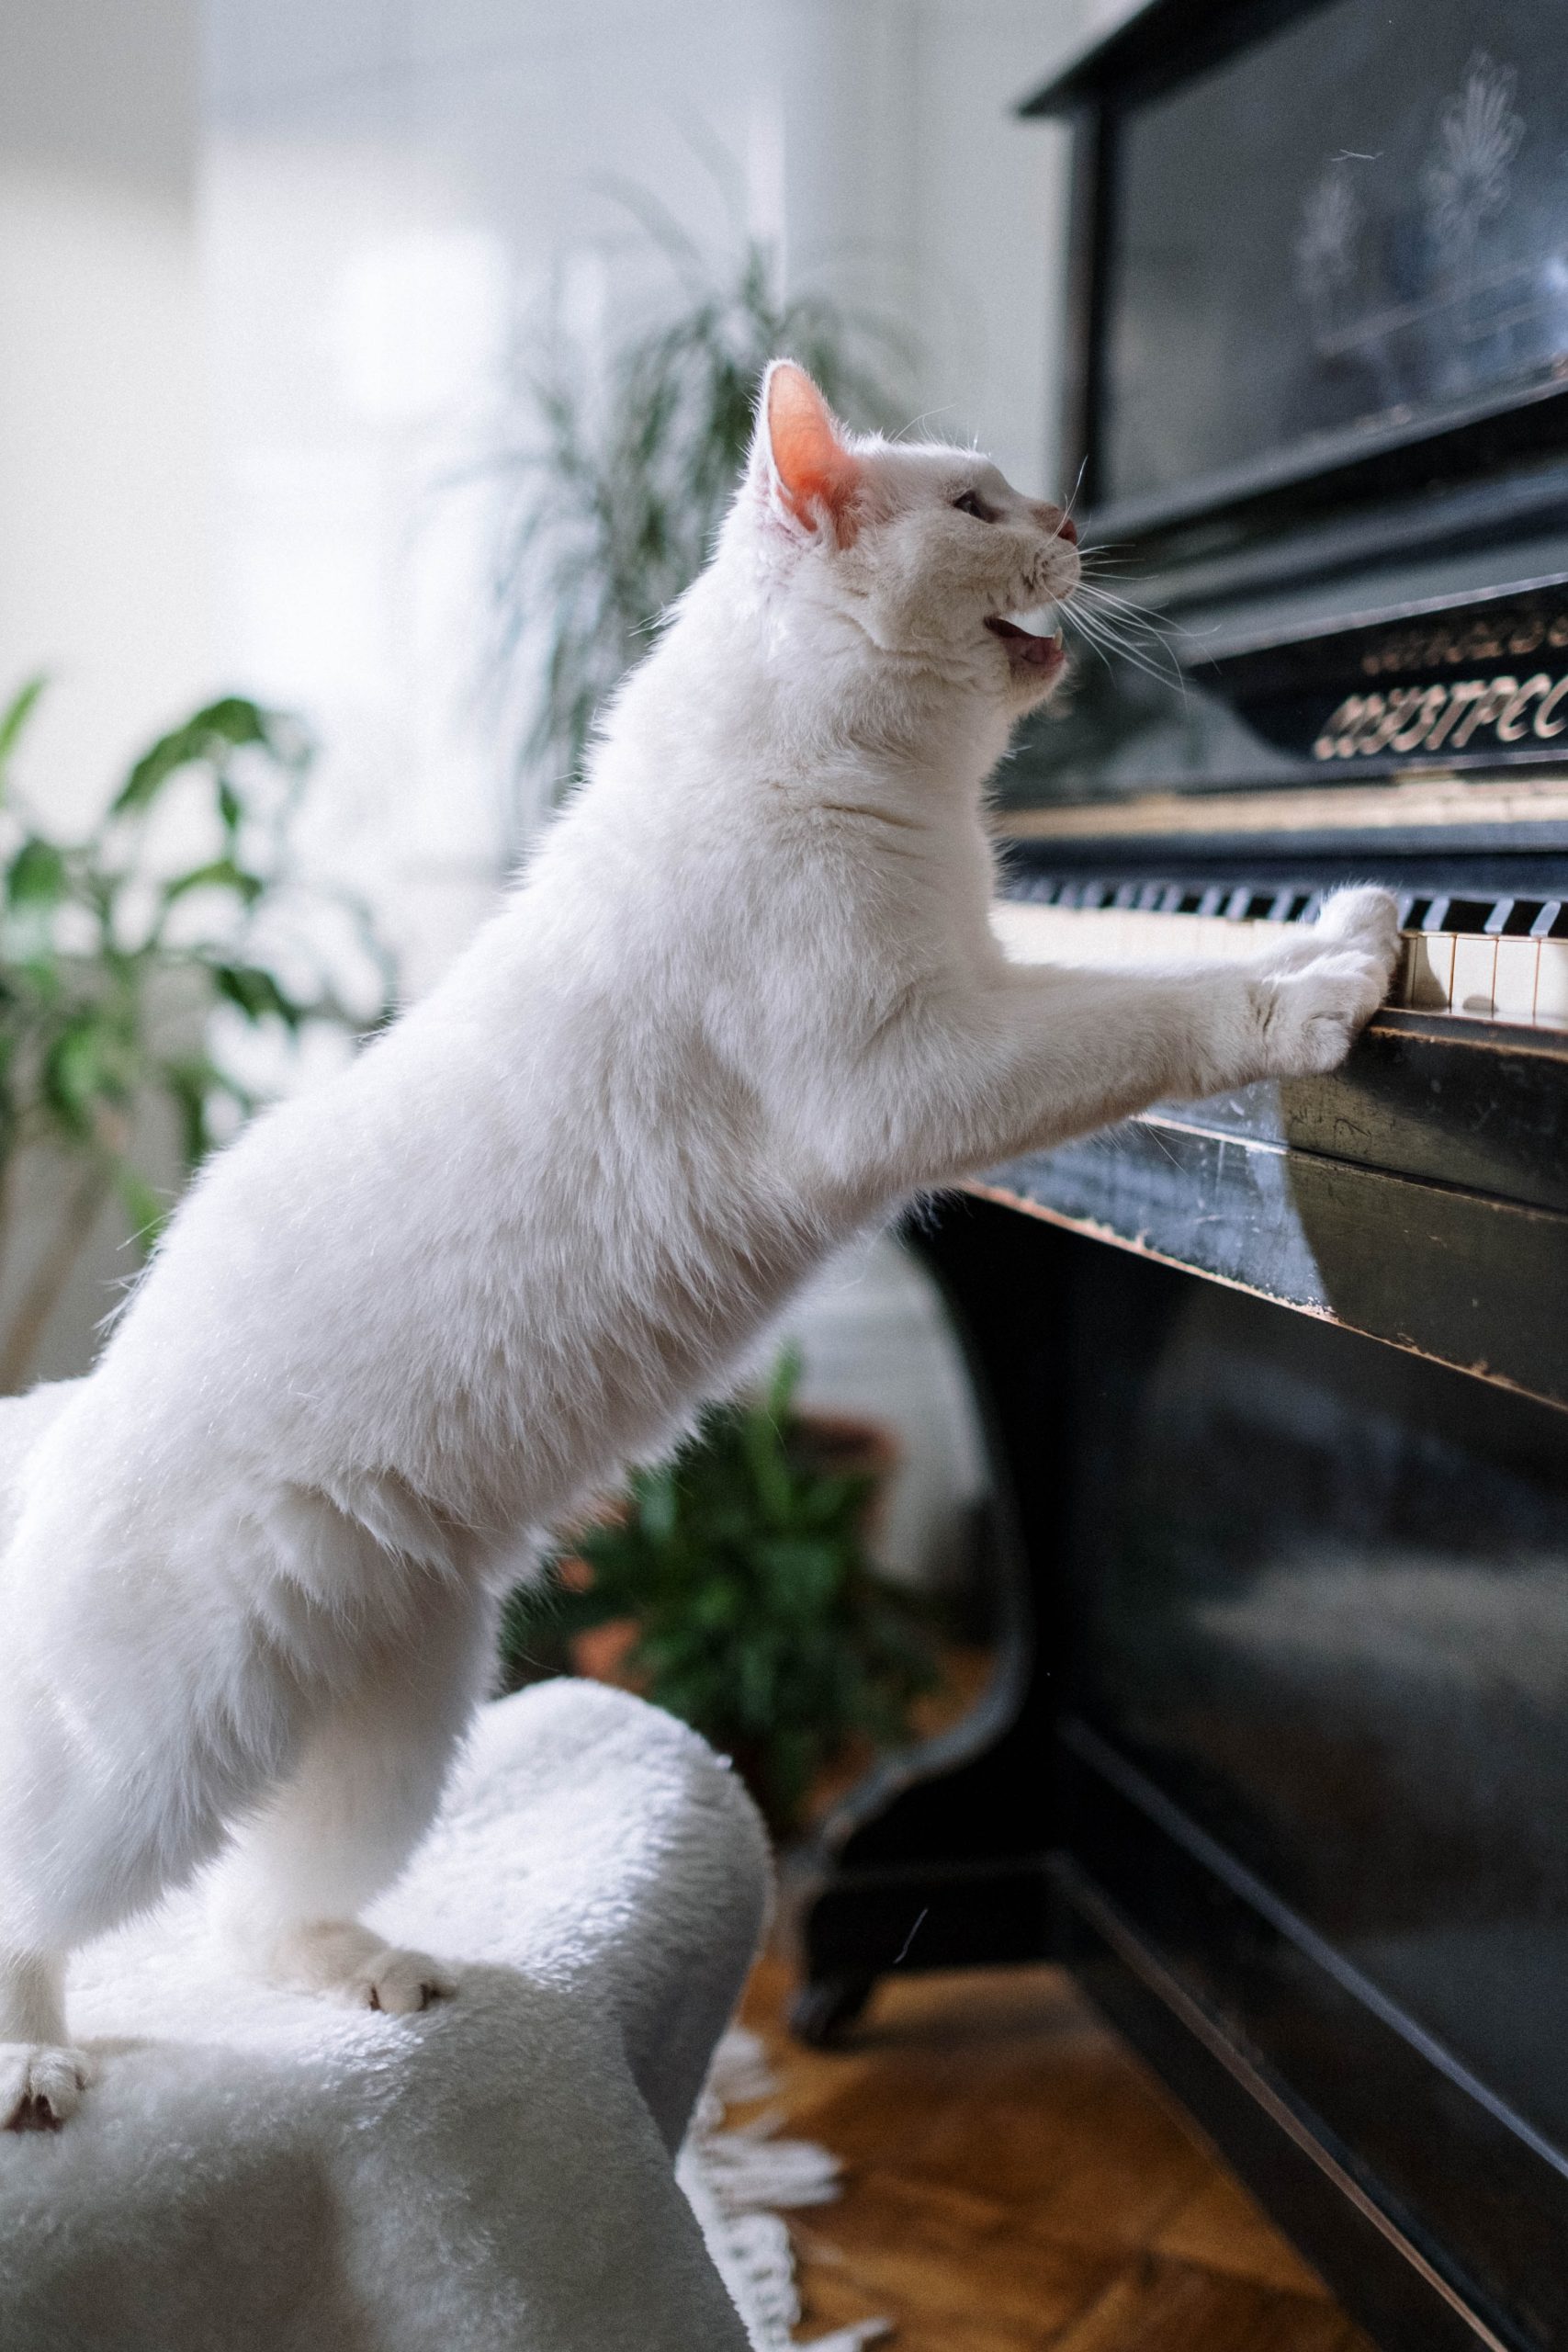 A cat and a piano